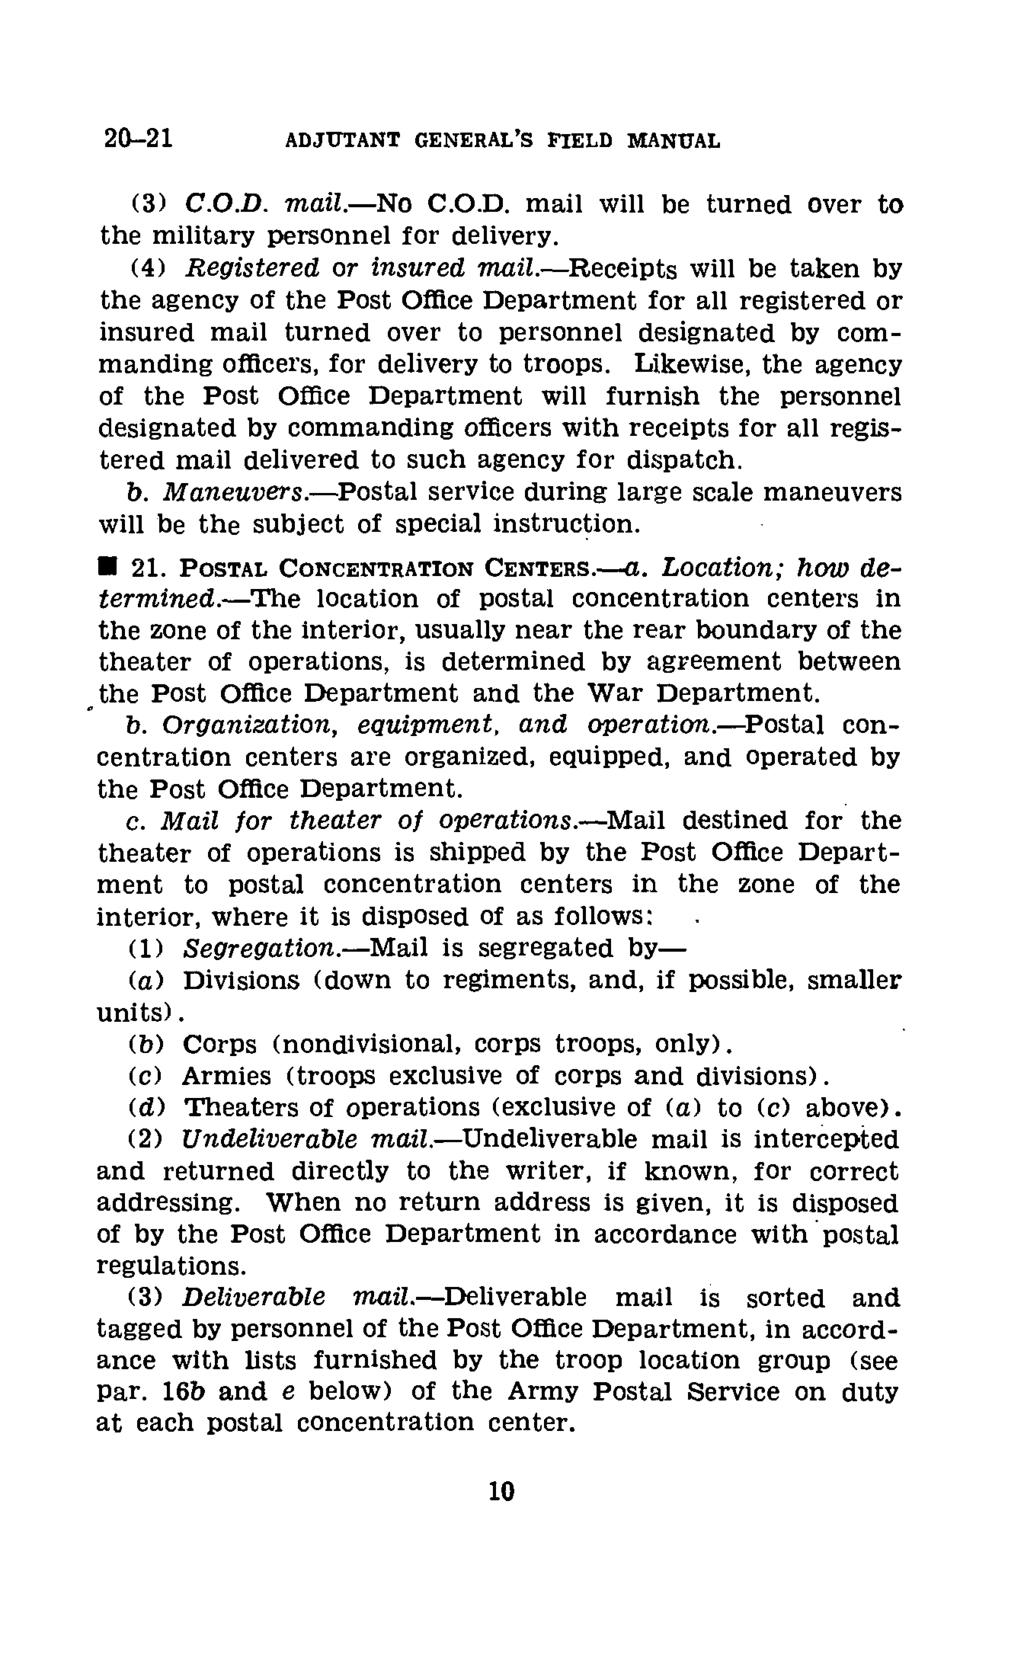 20-21 ADJUTANT GENERAL'S FIELD MANUAL (3) C.O.D. mail.-no C.O.D. mail will be turned over to the military personnel for delivery. (4) Registered or insured mail.